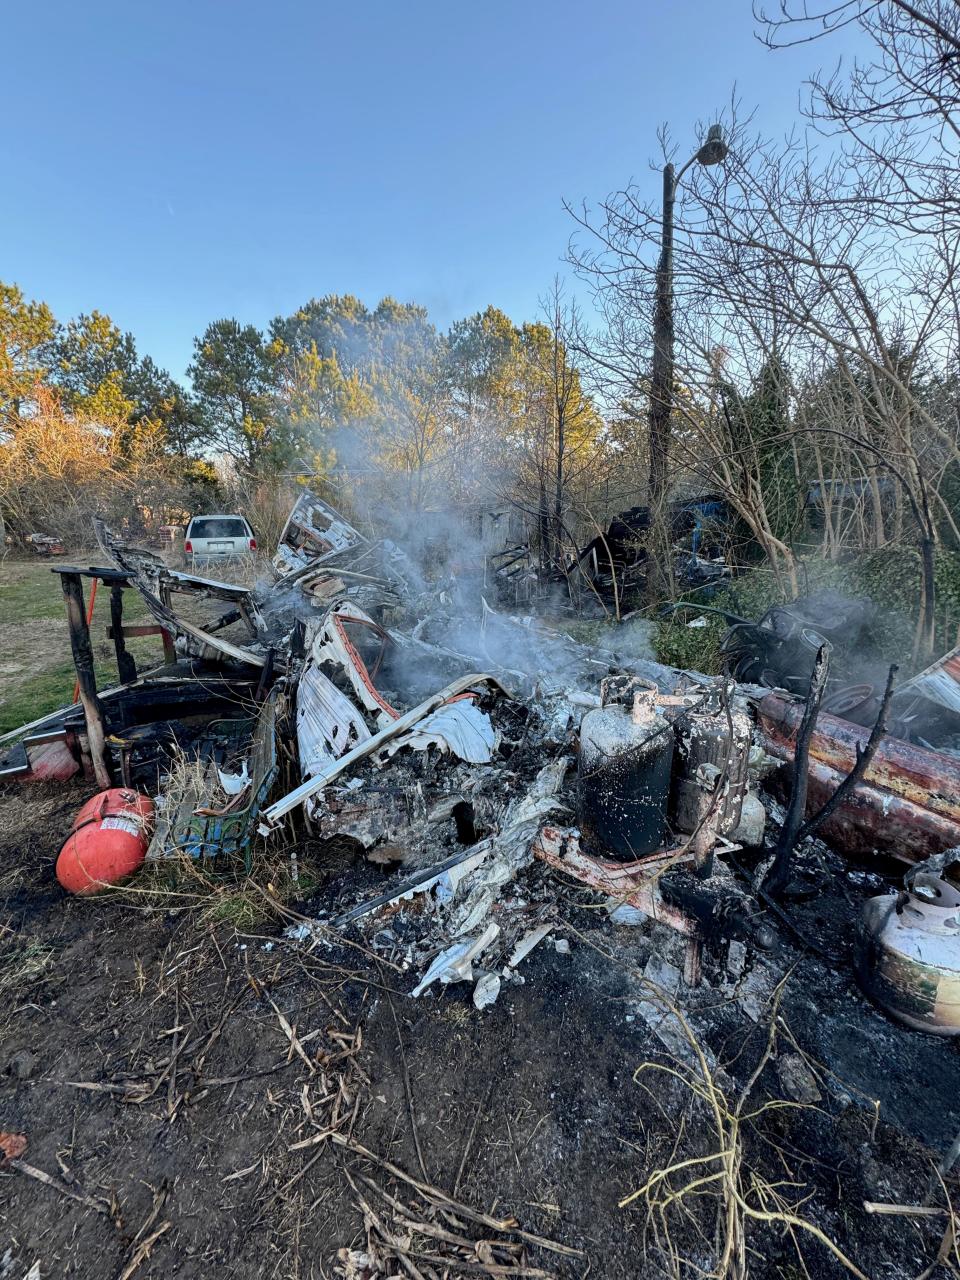 At 6 a.m. Sunday, Feb. 4, the Stockton and Girdletree Volunteer Fire Departments were dispatched for this outside fire in the 800 block of Greenbackville Road. One person died in the fire.